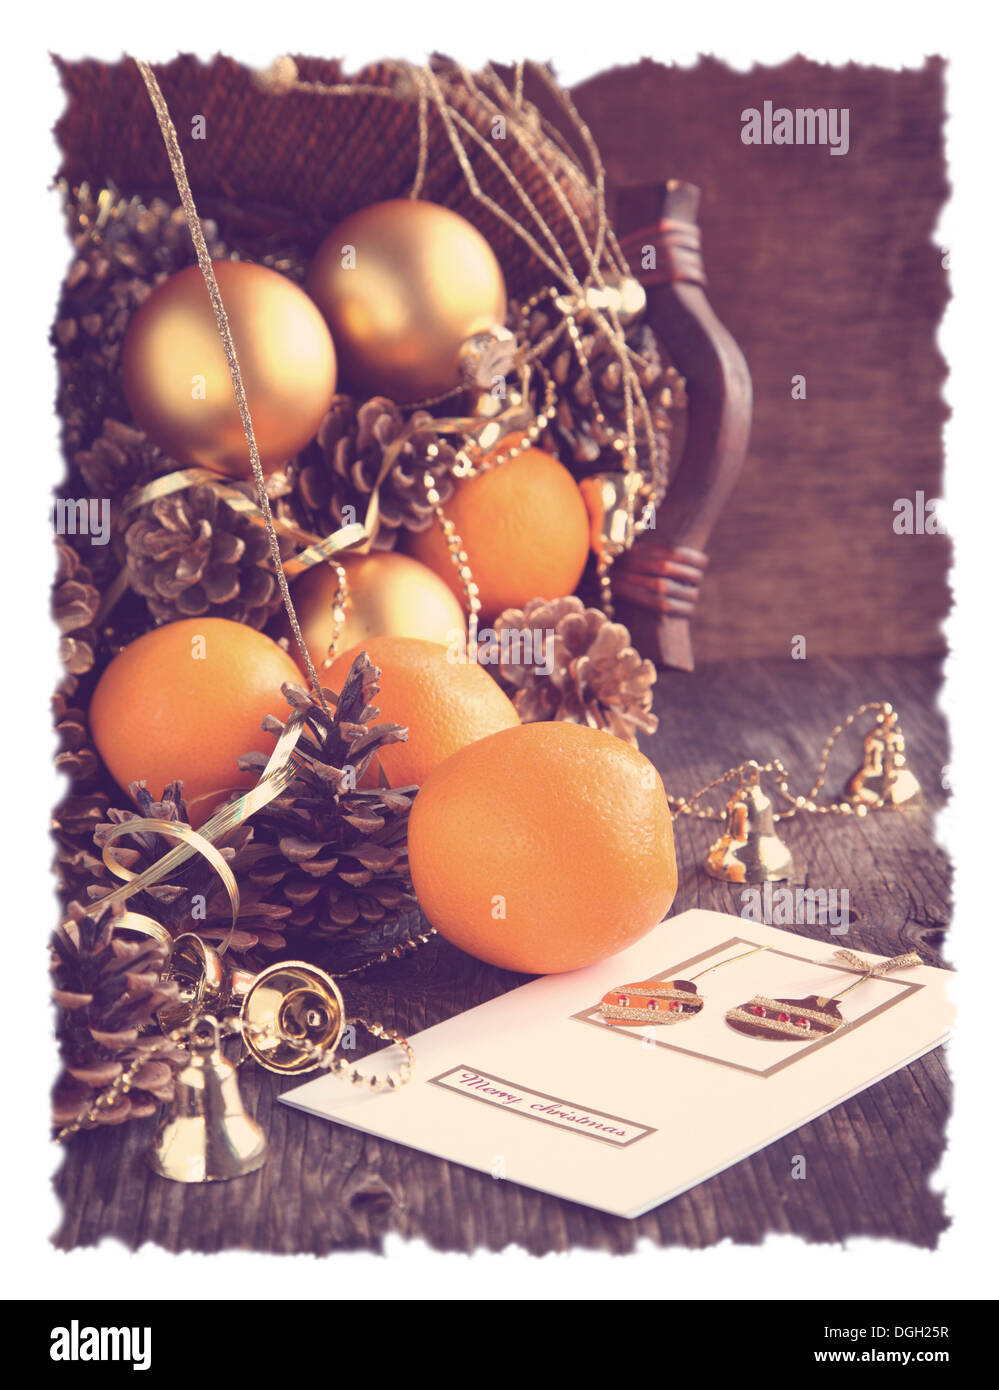 Christmas card and decoration with oranges, pine cones and ornaments Stock Photo